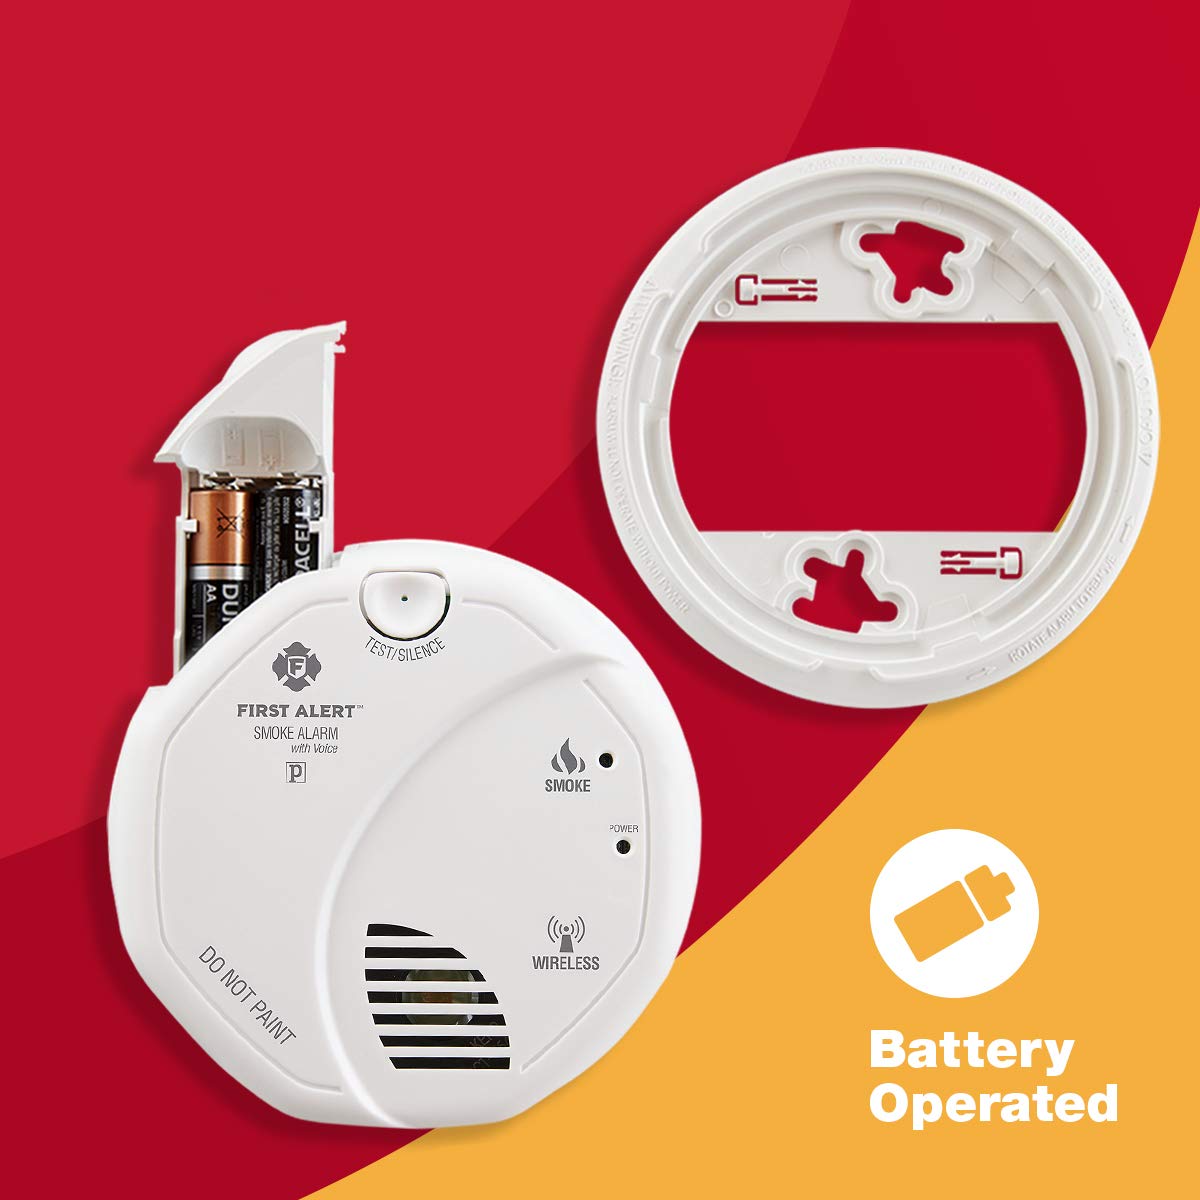 First Alert SA511CN2-3ST Wireless Interconnected Smoke Alarm with Voice Location, Battery Operated, 2 Pack